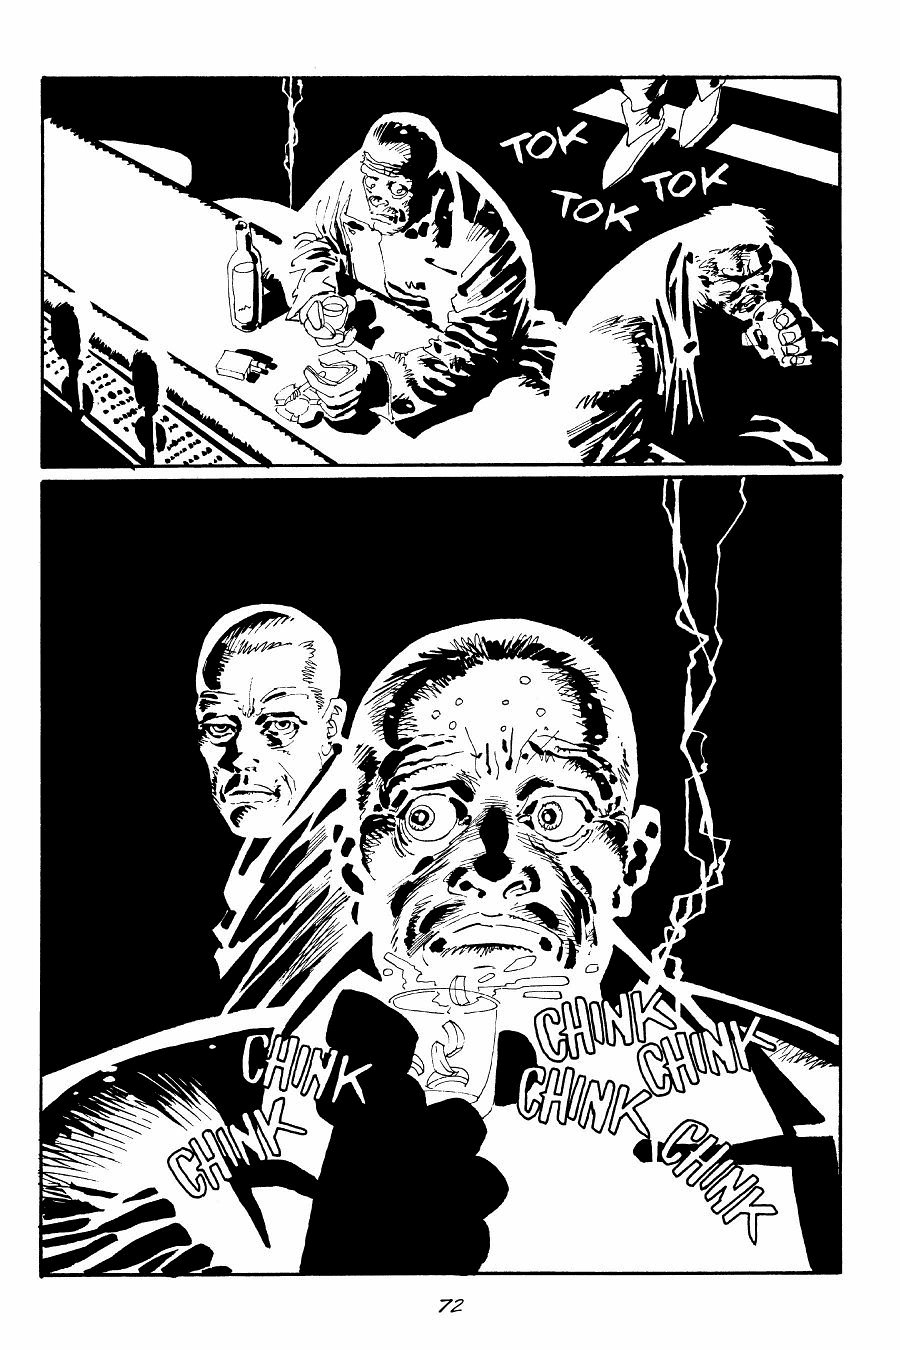 page 72 of sin city 6 booze broads and bullets